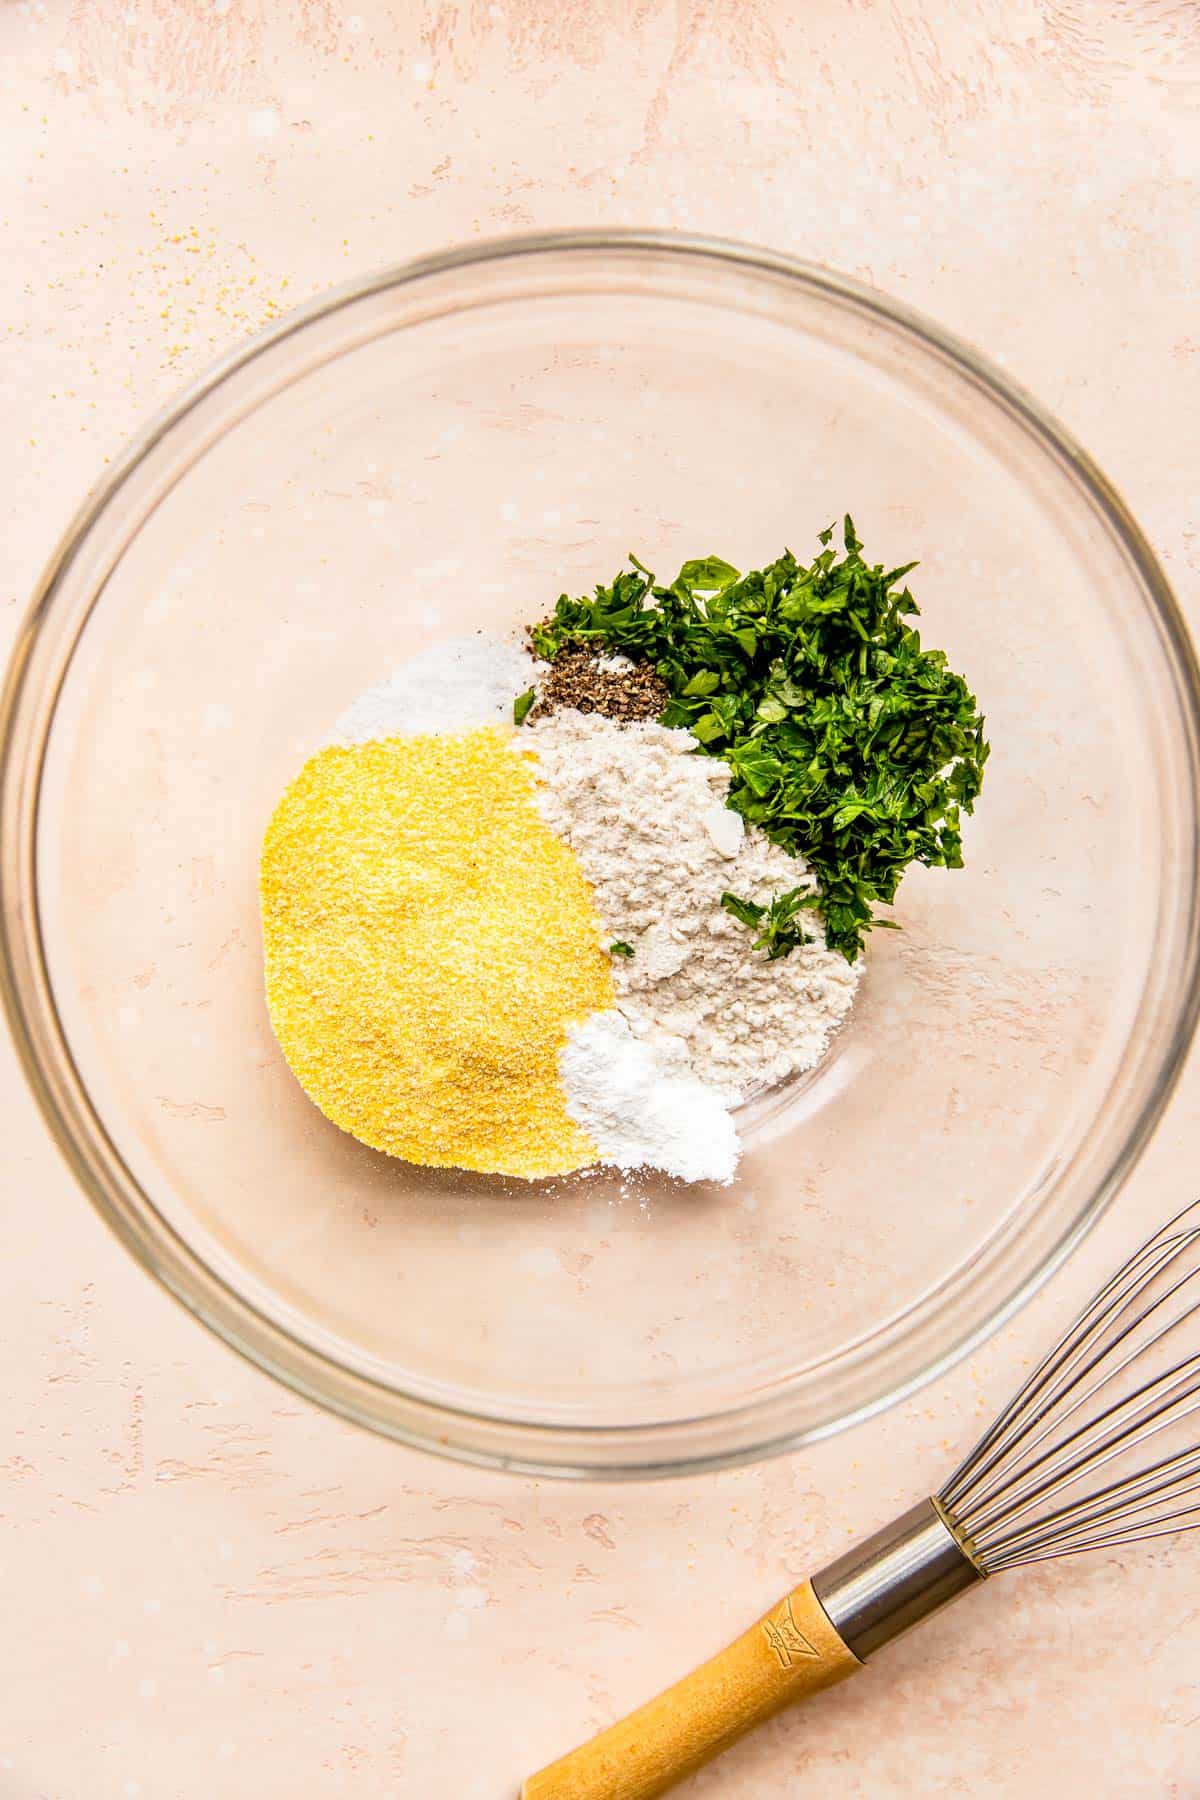 cornmeal, flour, fresh parsley, baking powder, salt, and pepper in a clear bowl next to a metal whisk